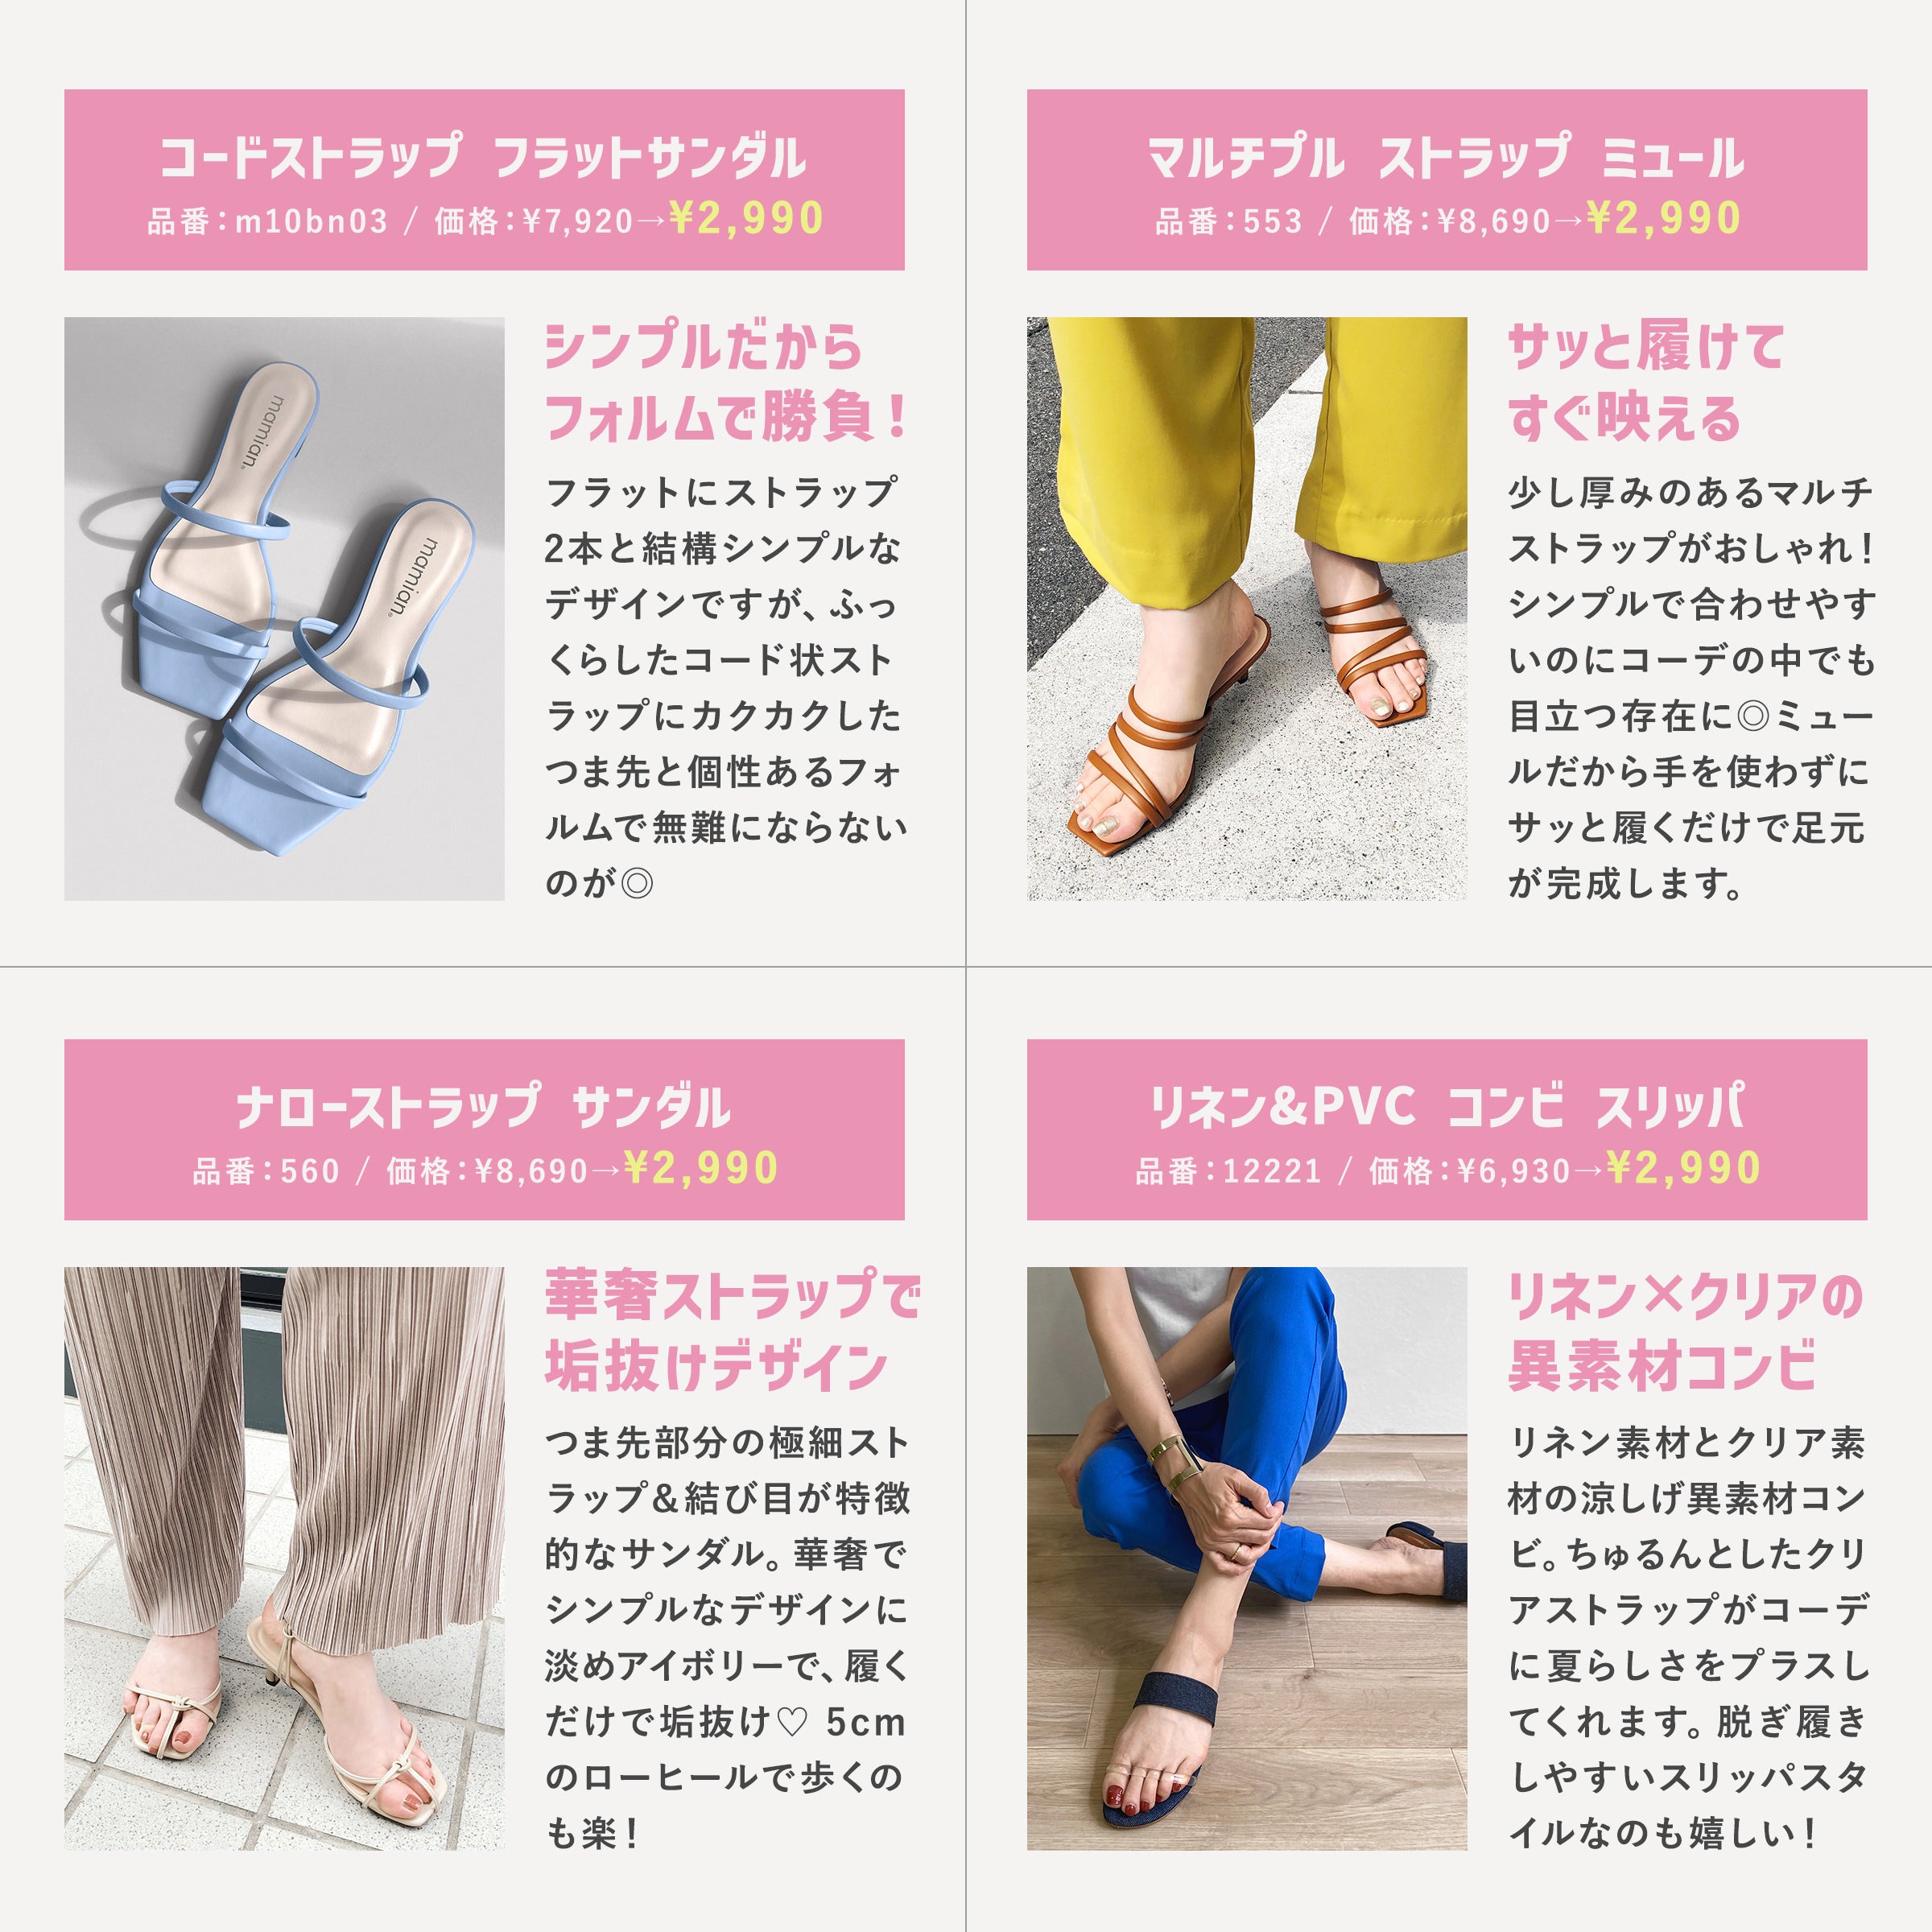 Easy to buy now! Sandals you can buy for under 3,000 yen